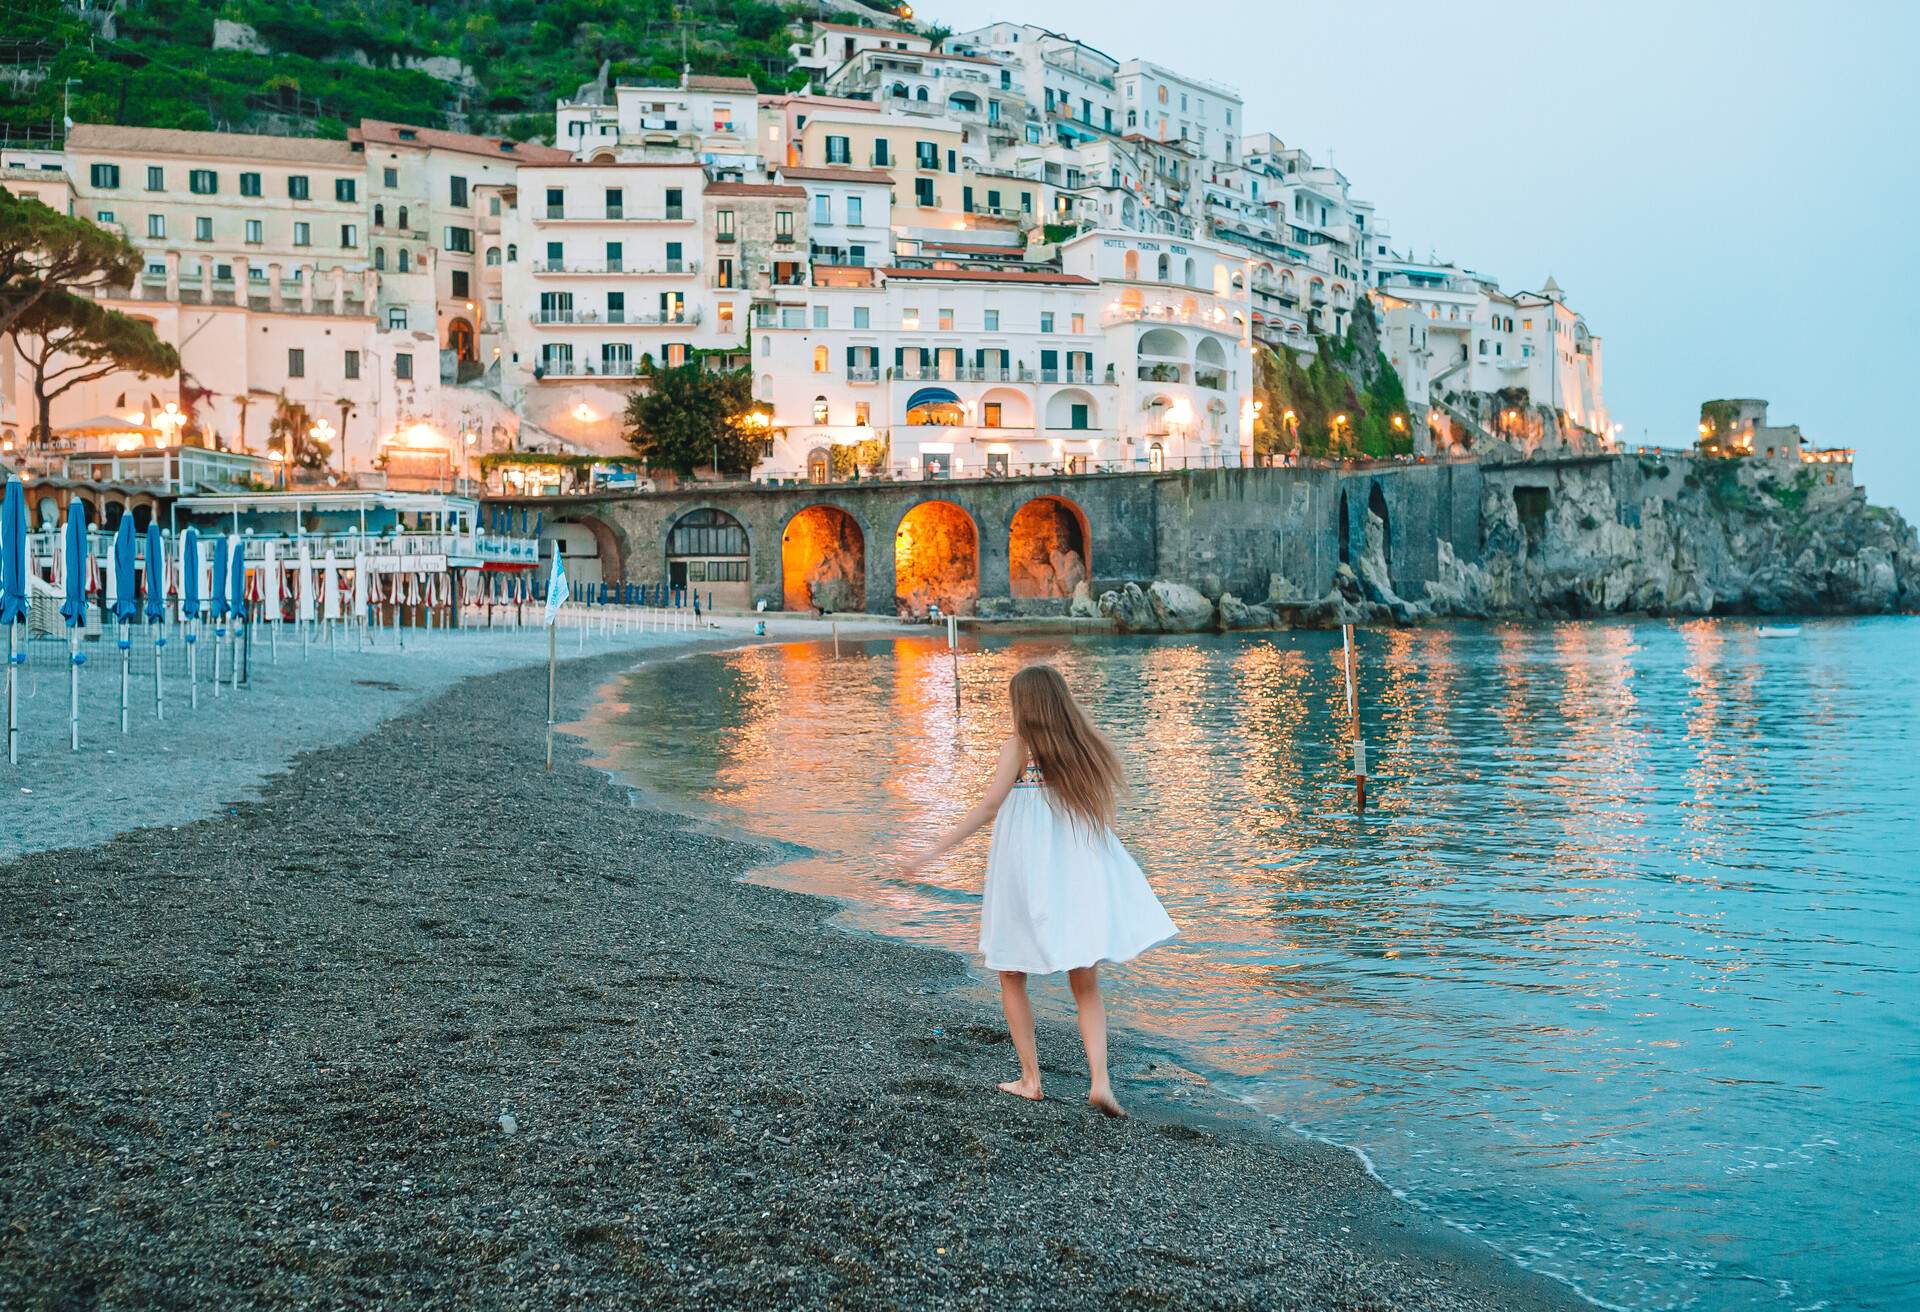 dest_italy_amalfi_coast_theme_beach_family_gettyimages-1219229883_universal_within-usage-period_84949